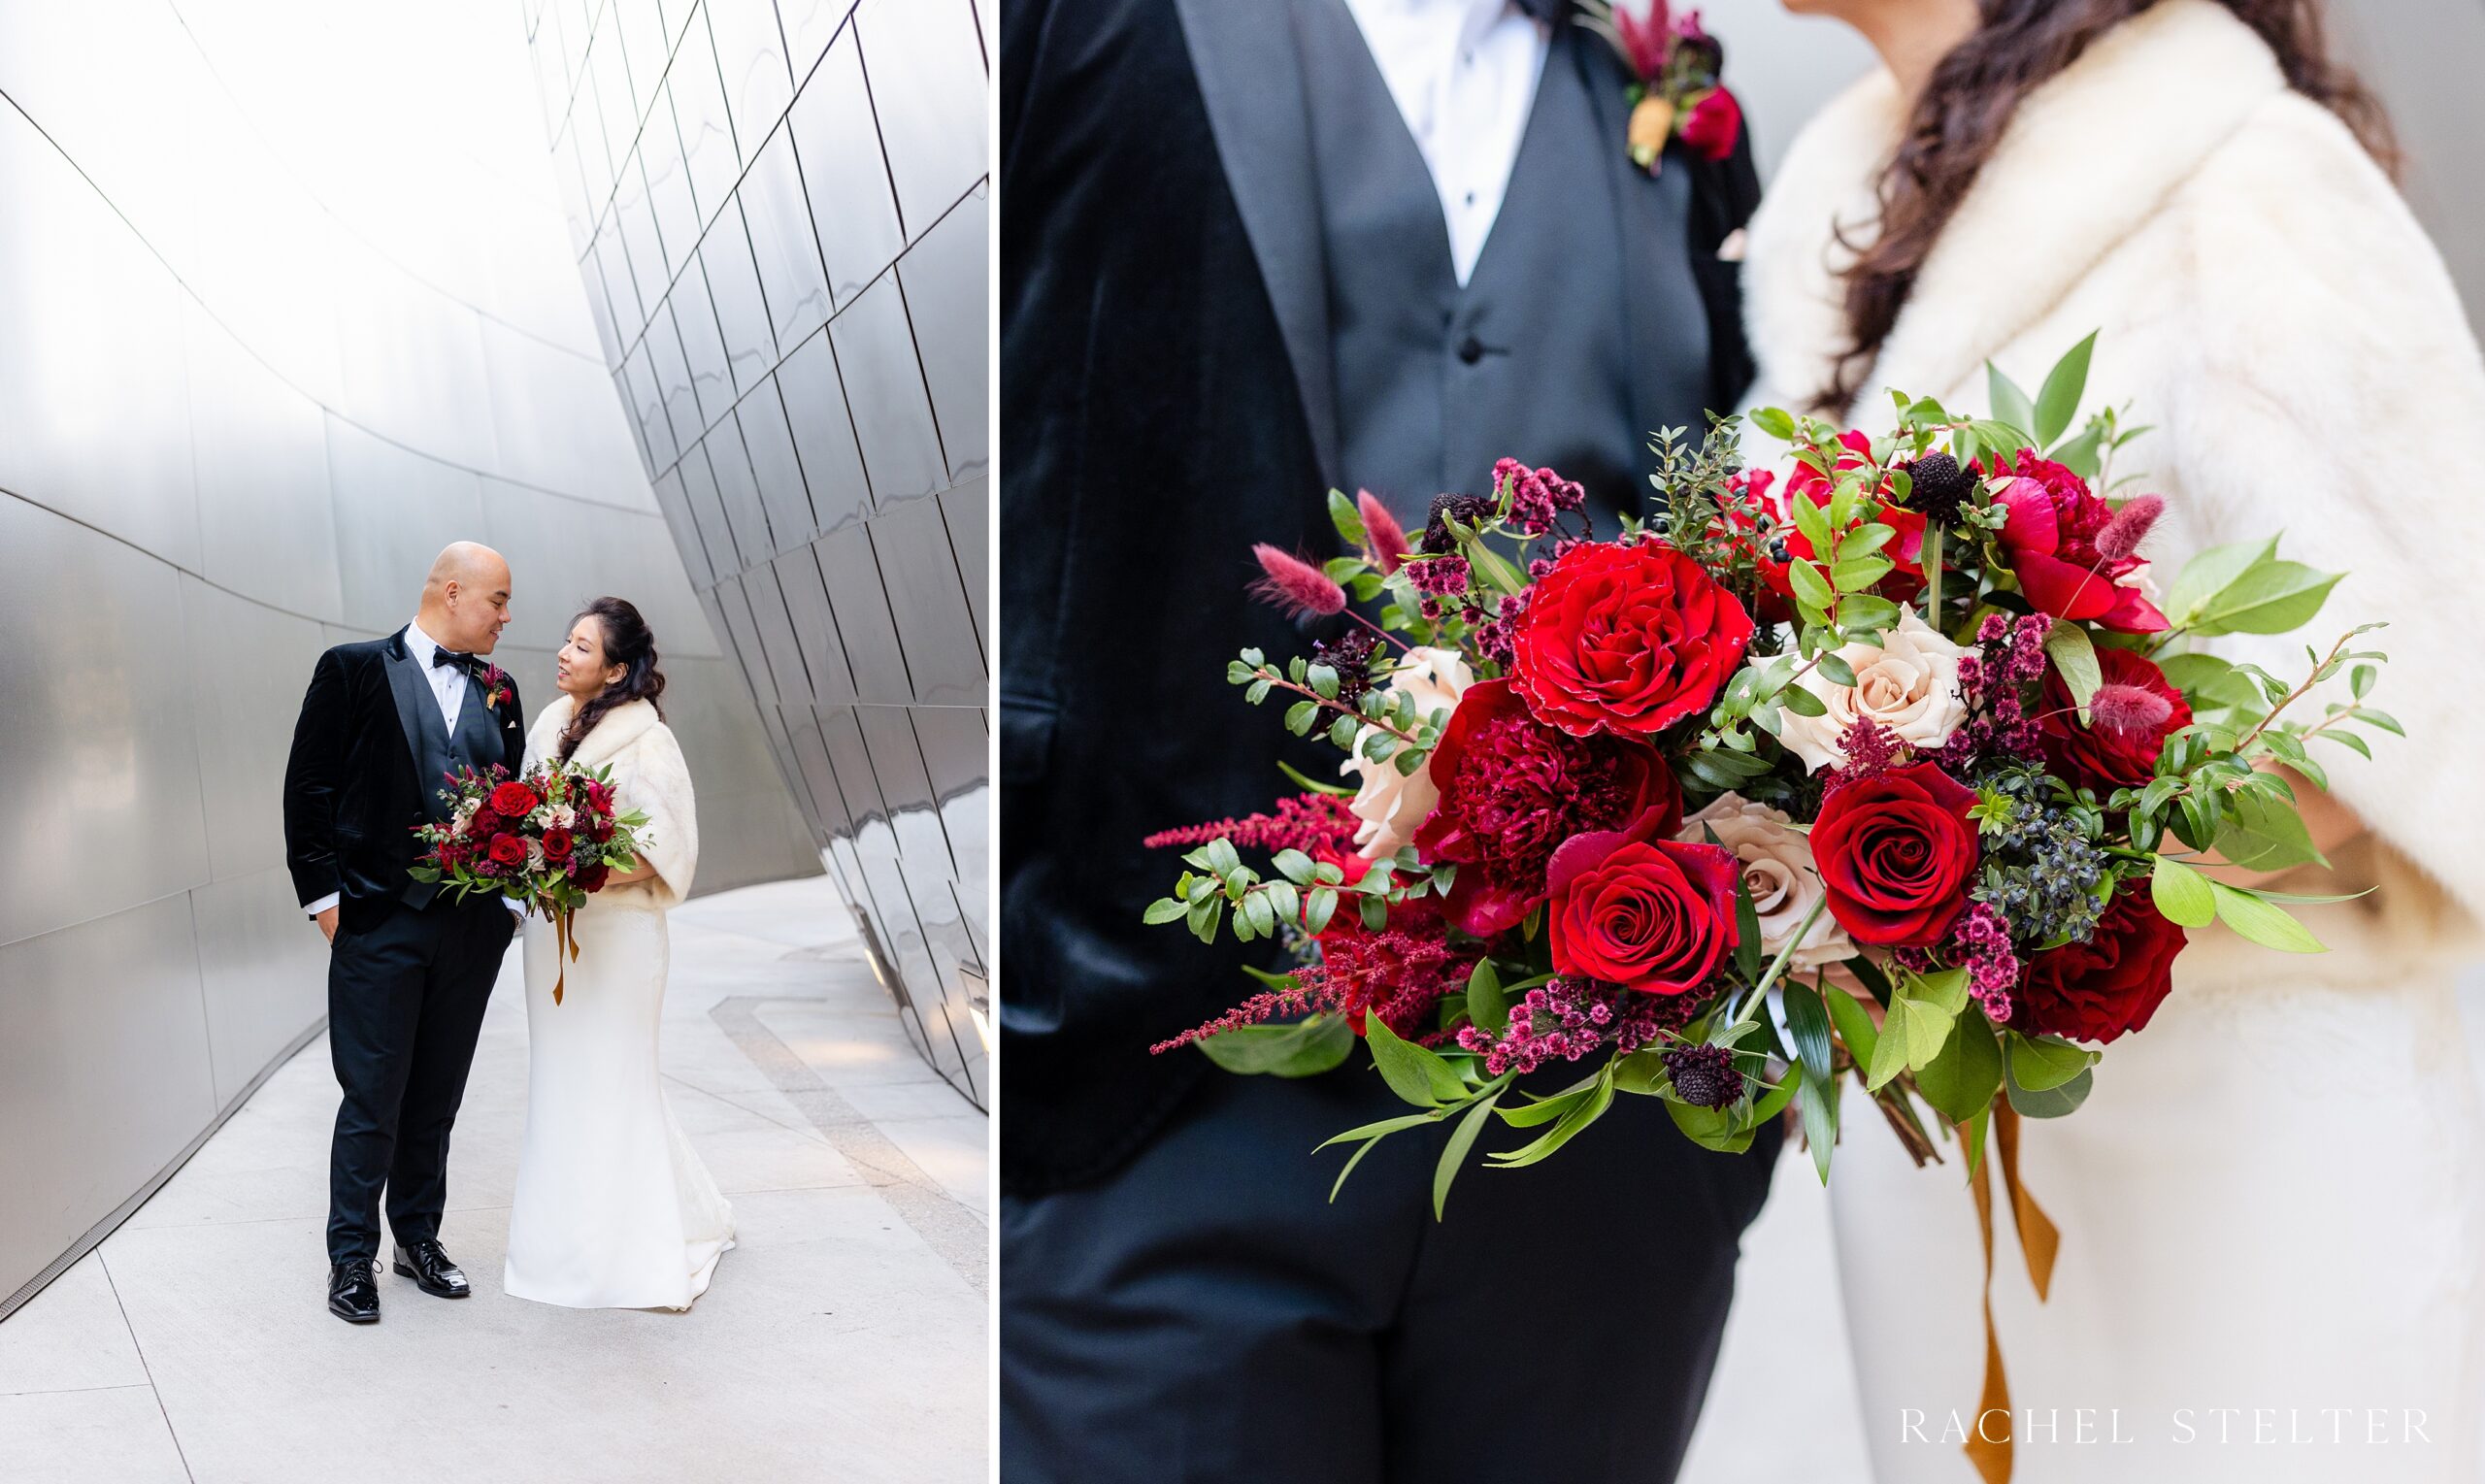 winter wedding in downtown Los Angeles at iconic Walt Disney Concert Hall